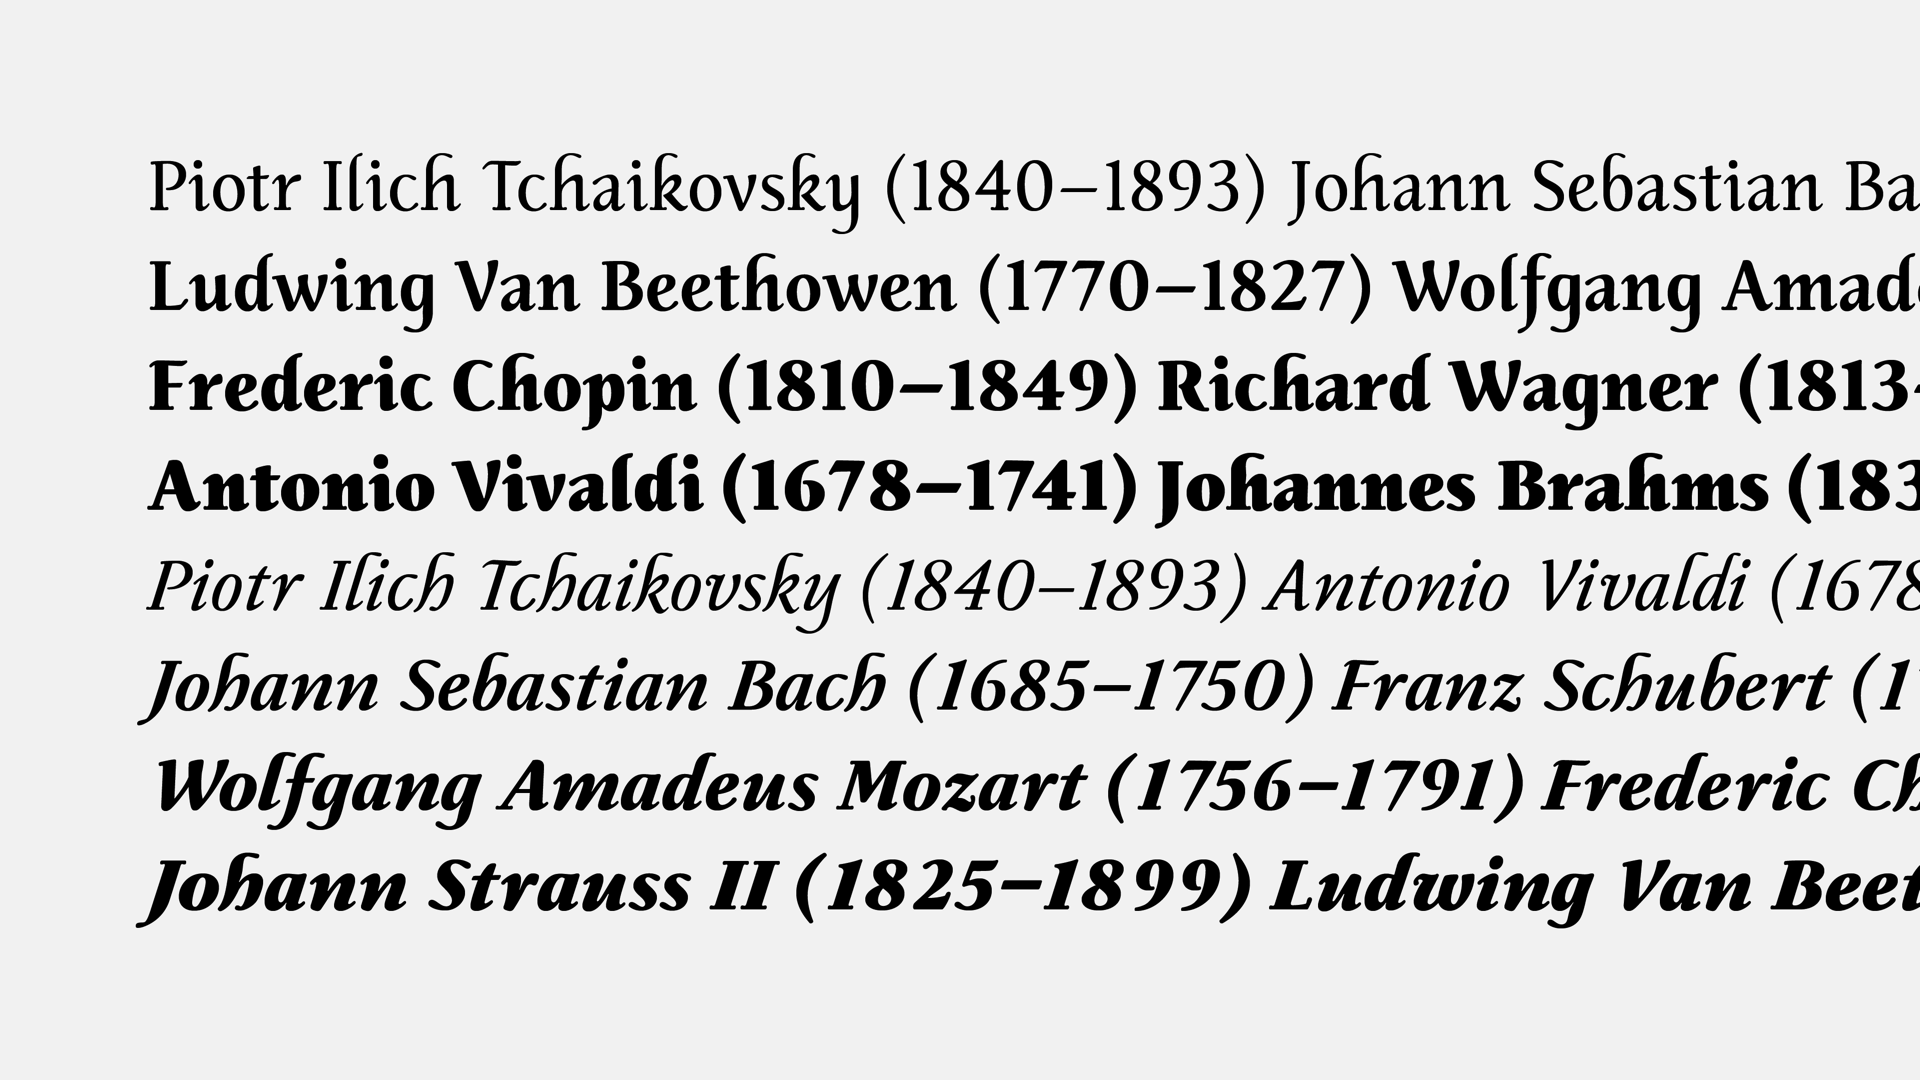 Light gray background. On the top layer, the names of several artists who composed symphonies, such as Mozart and Bethoven, are written in black text.